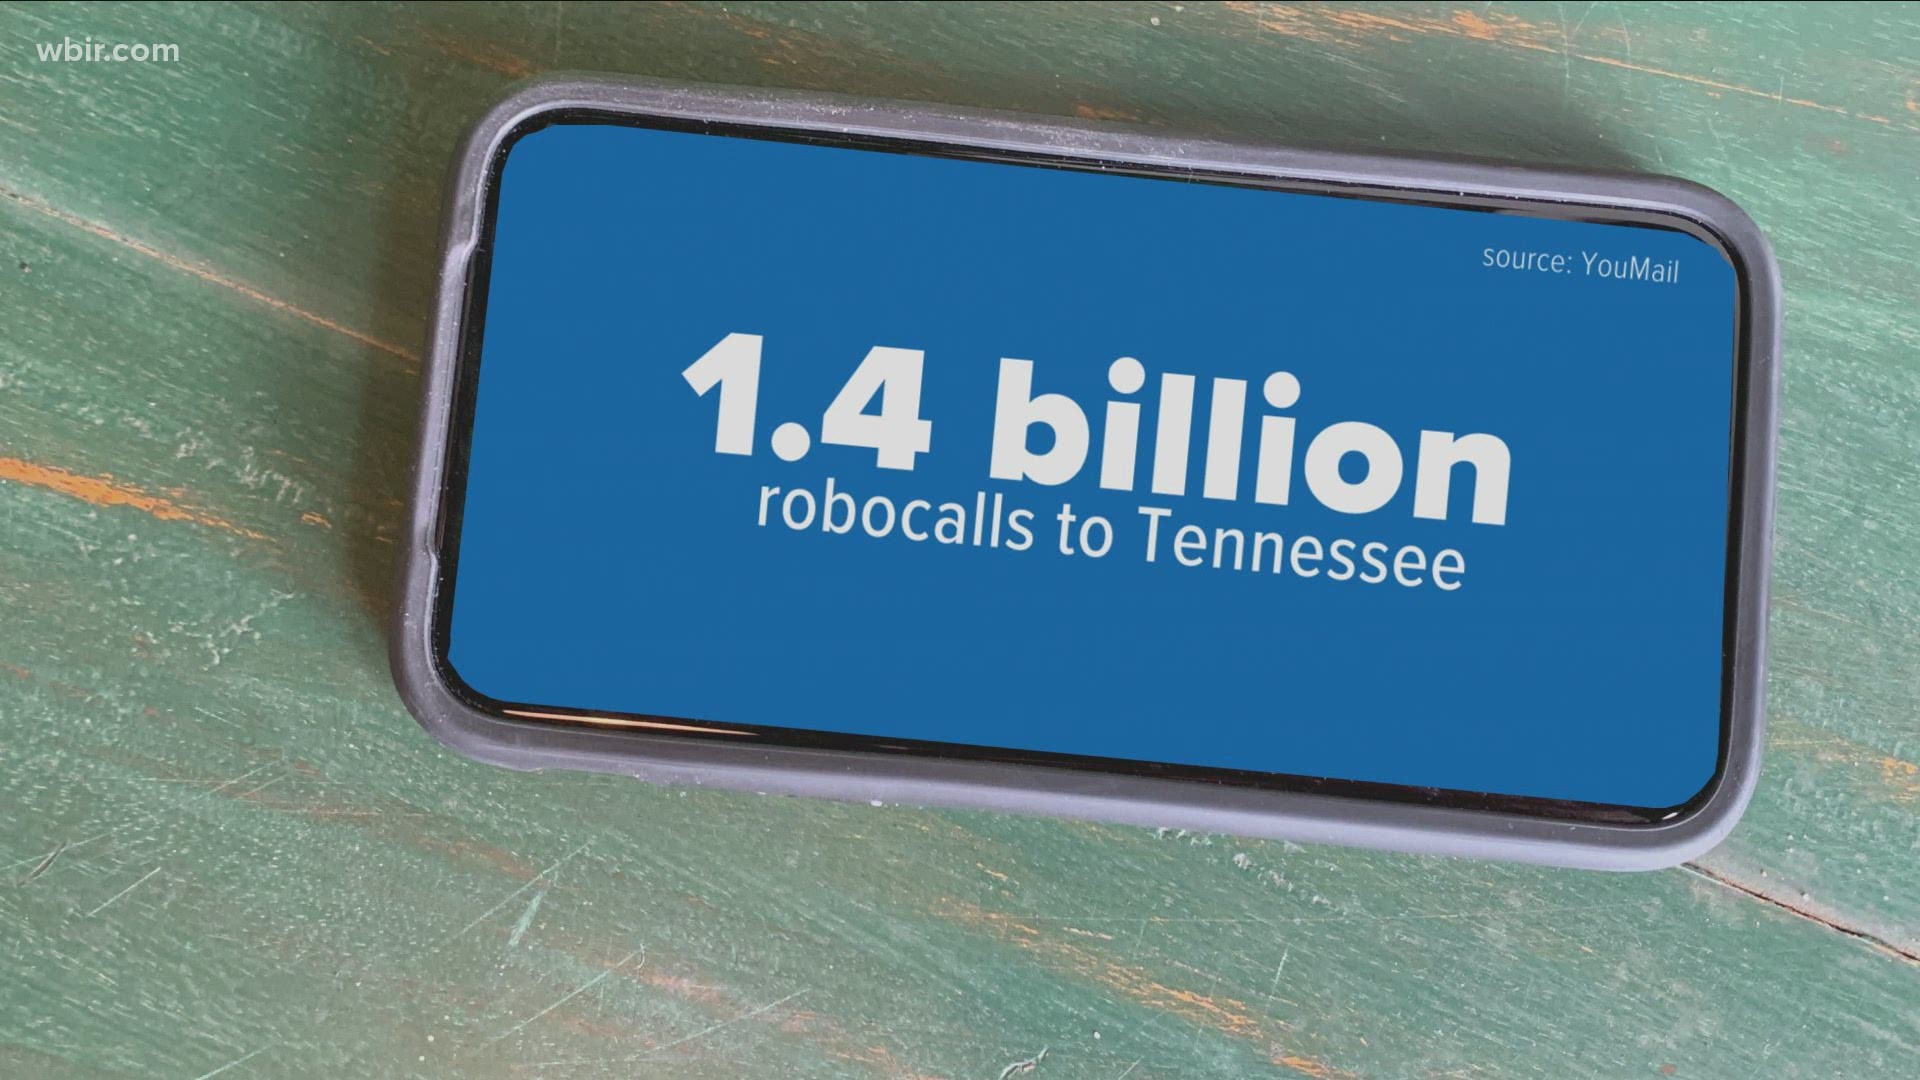 Tennesseans got more than 1.4 billion robocalls last year. That's more than 40 other states!